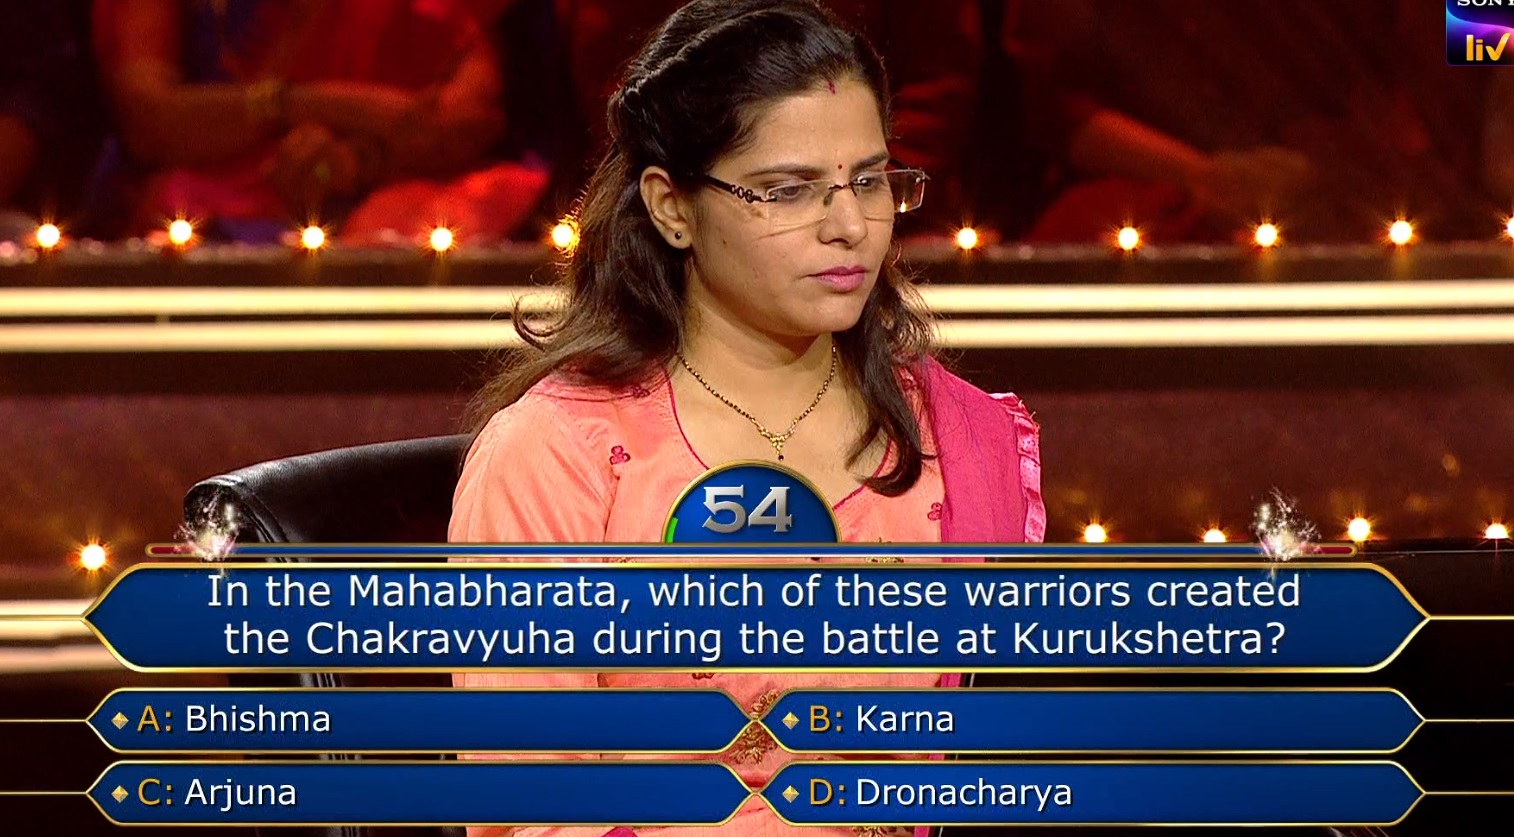 Ques : In the Mahabharata, which of these warriors created the Chakravyuha during the battle at Kurukshetra?